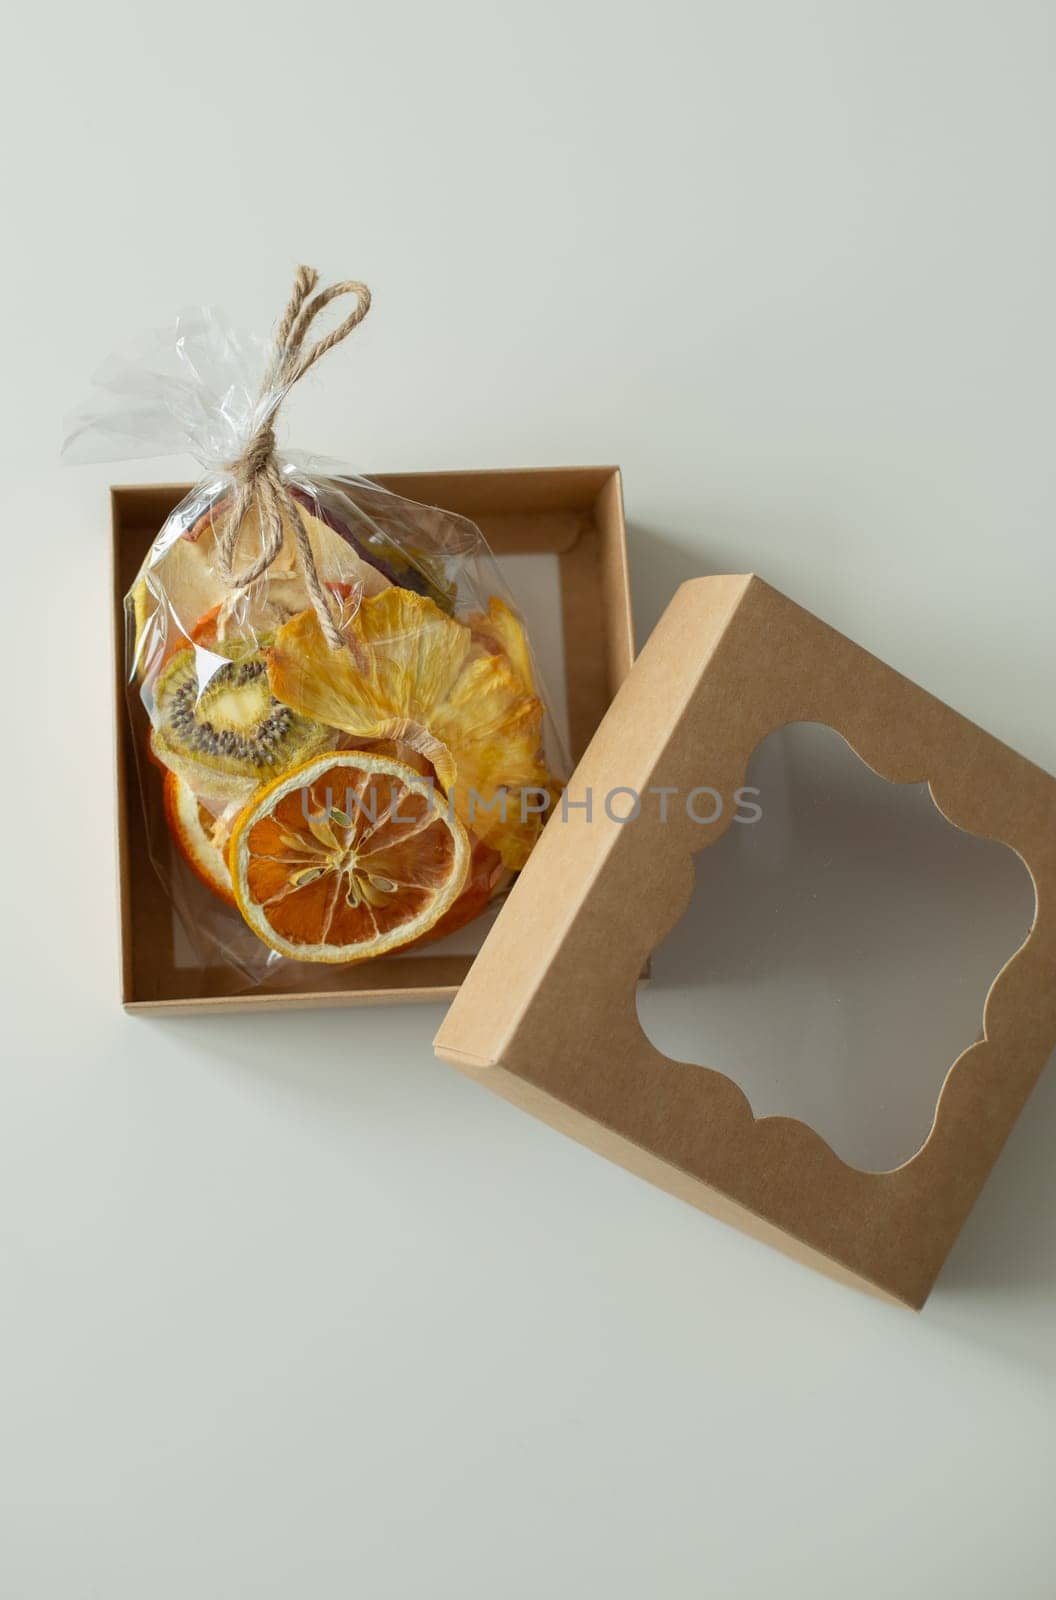 Gift set of various fruits - candied fruits. Dessert is a gift.